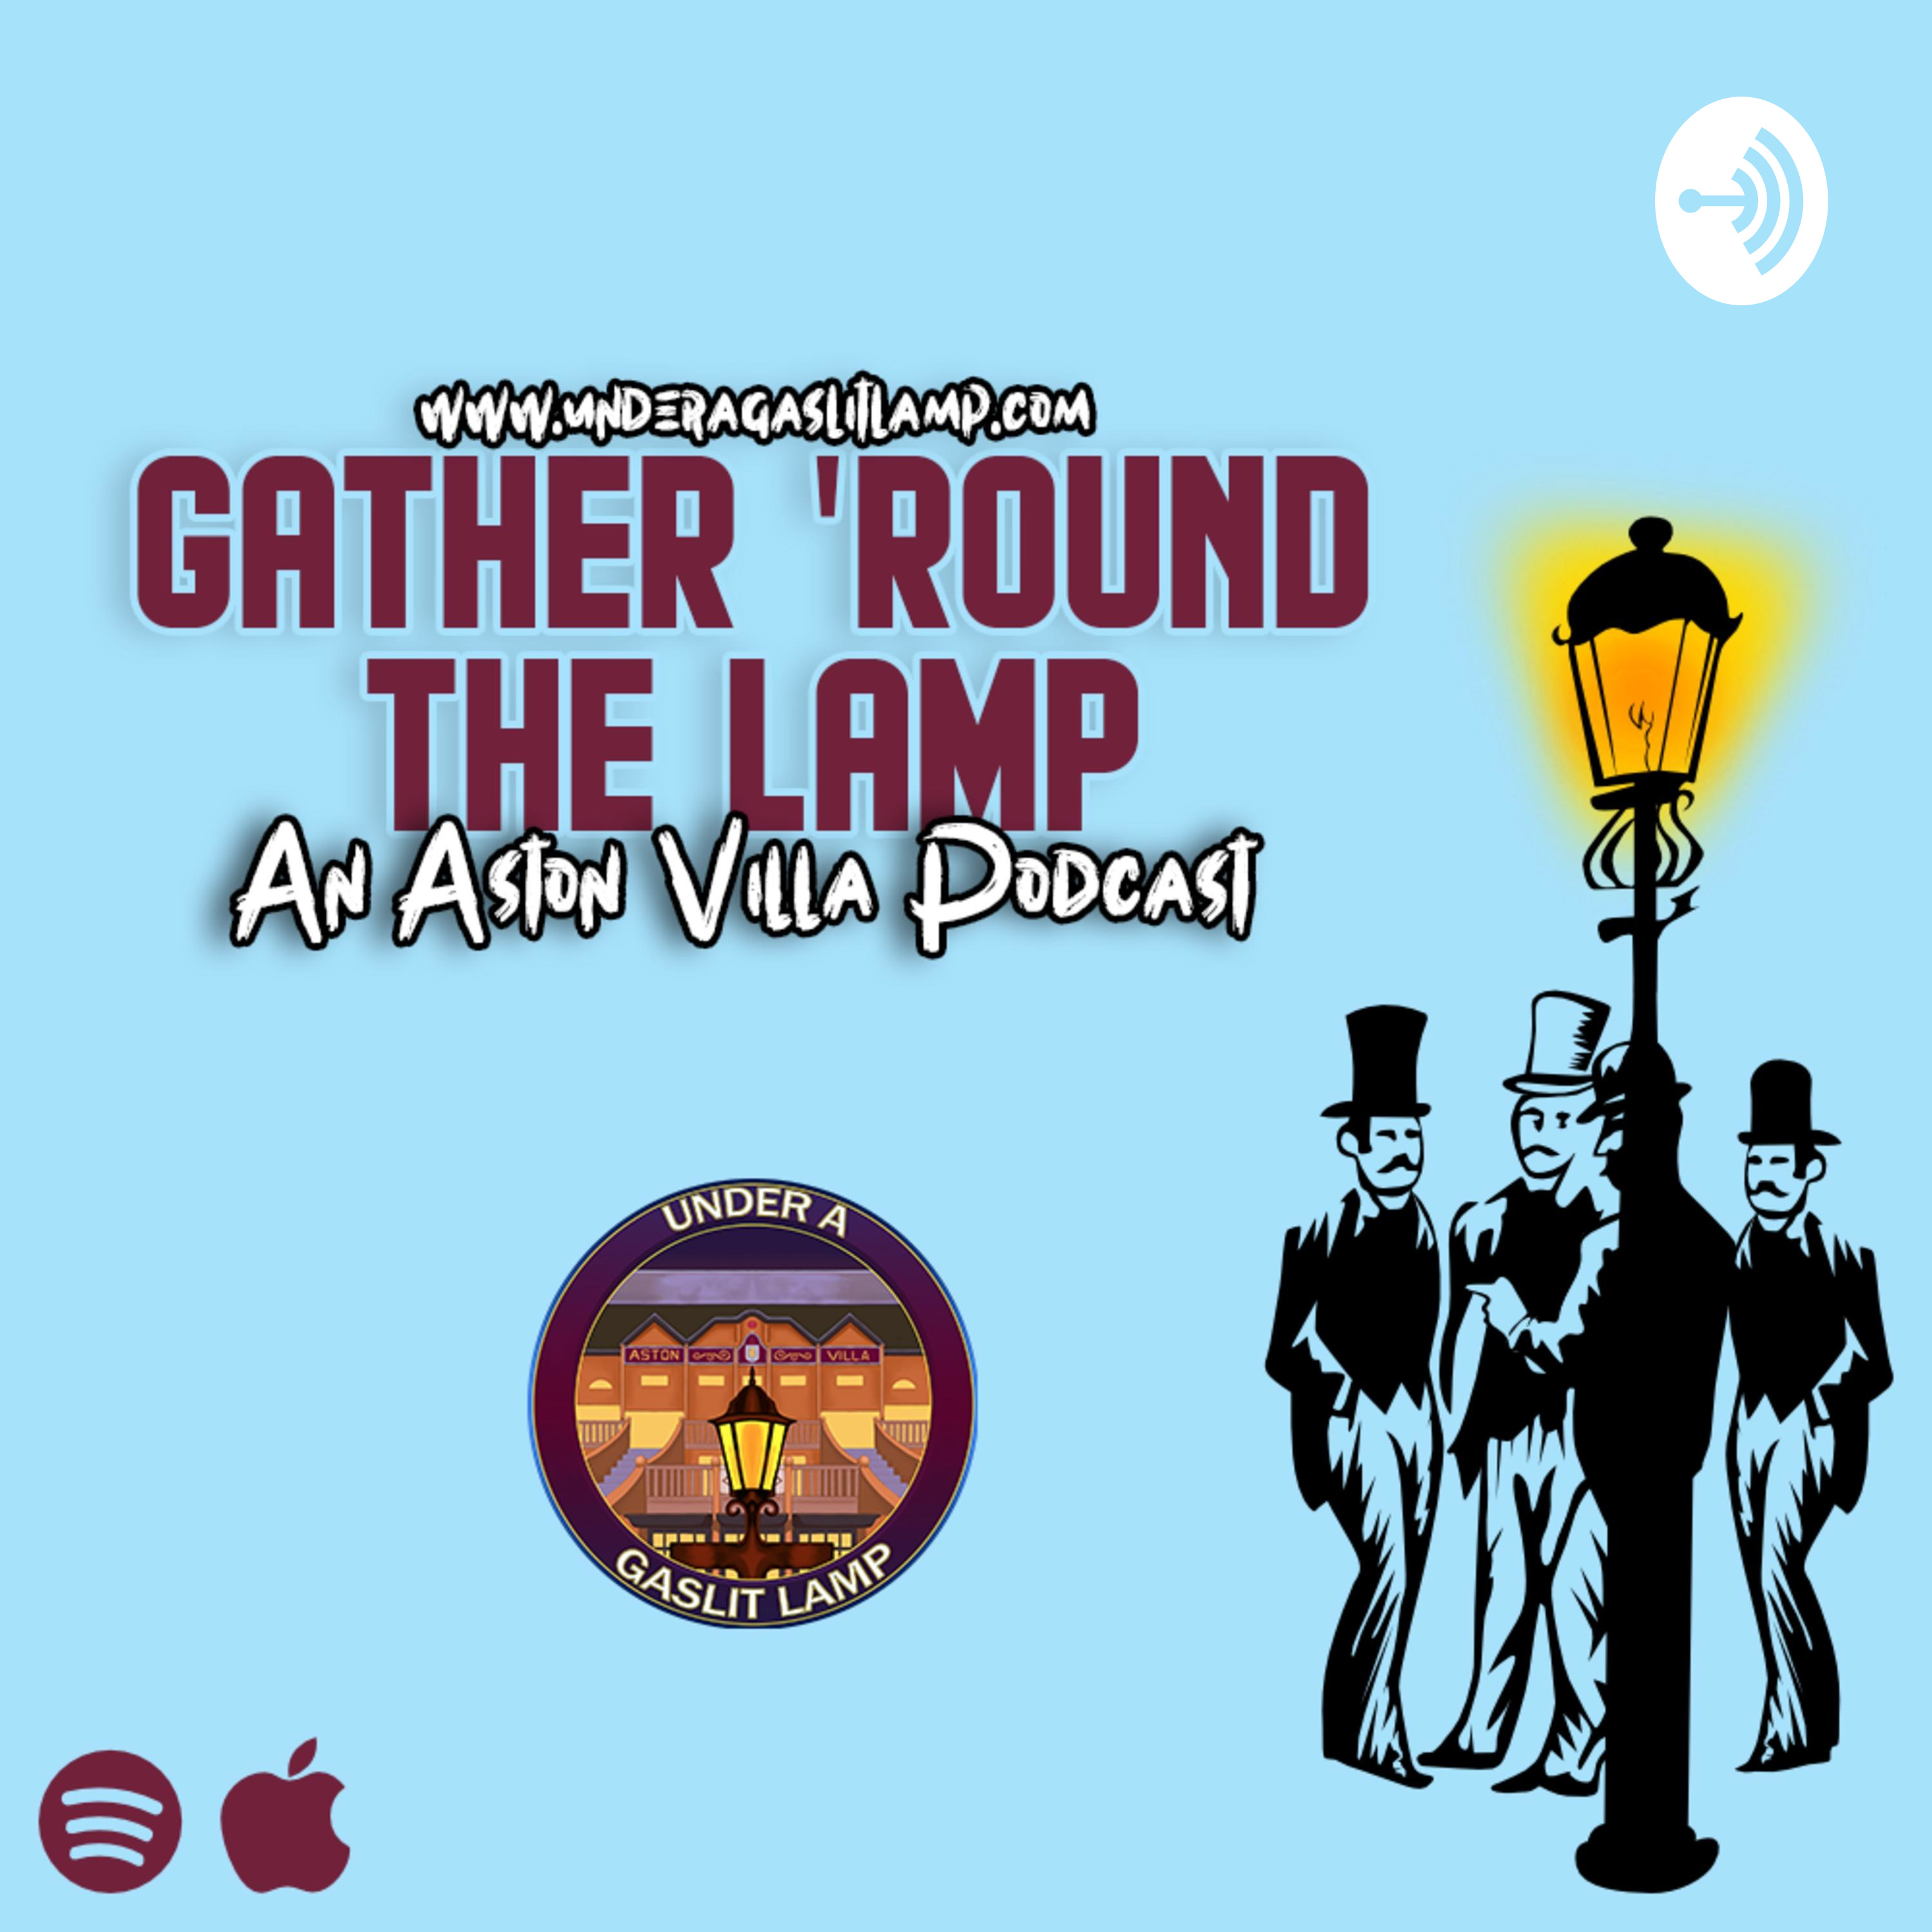 Gather 'Round The Lamp S4 E2 - Messy Situation